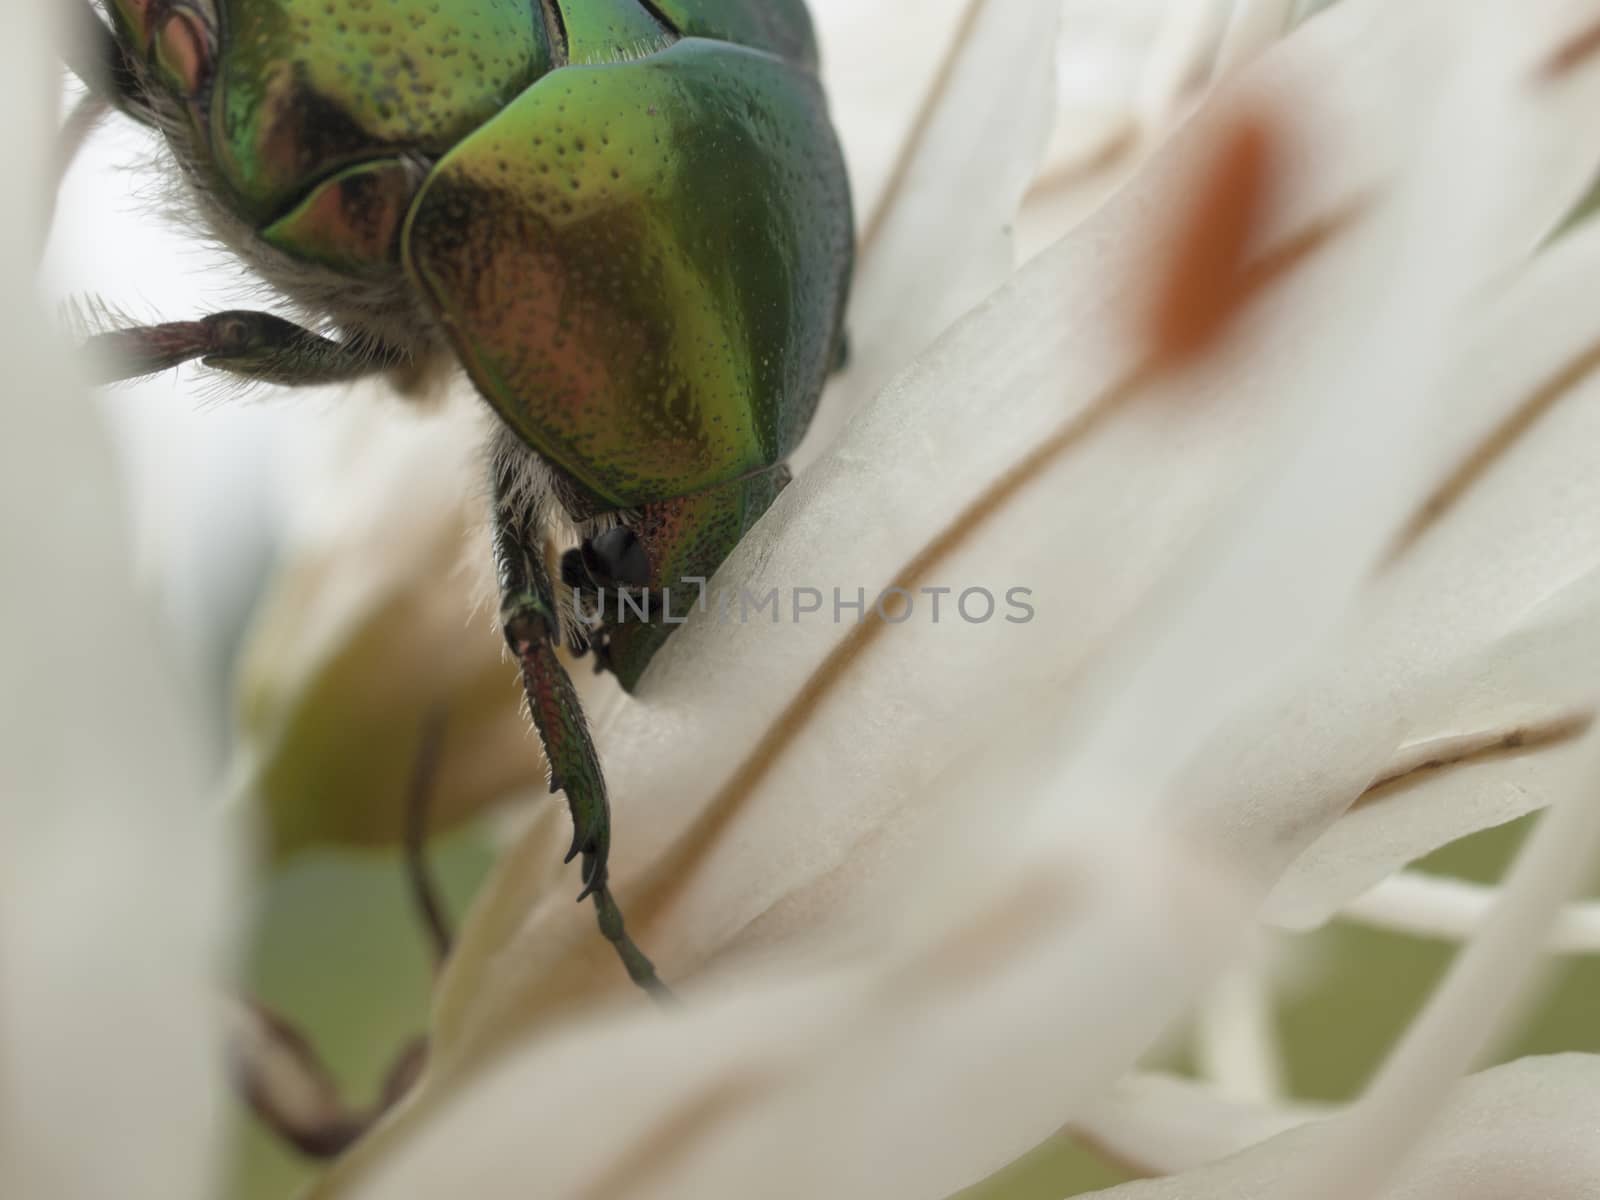 Green bug and lilly flower by Trala